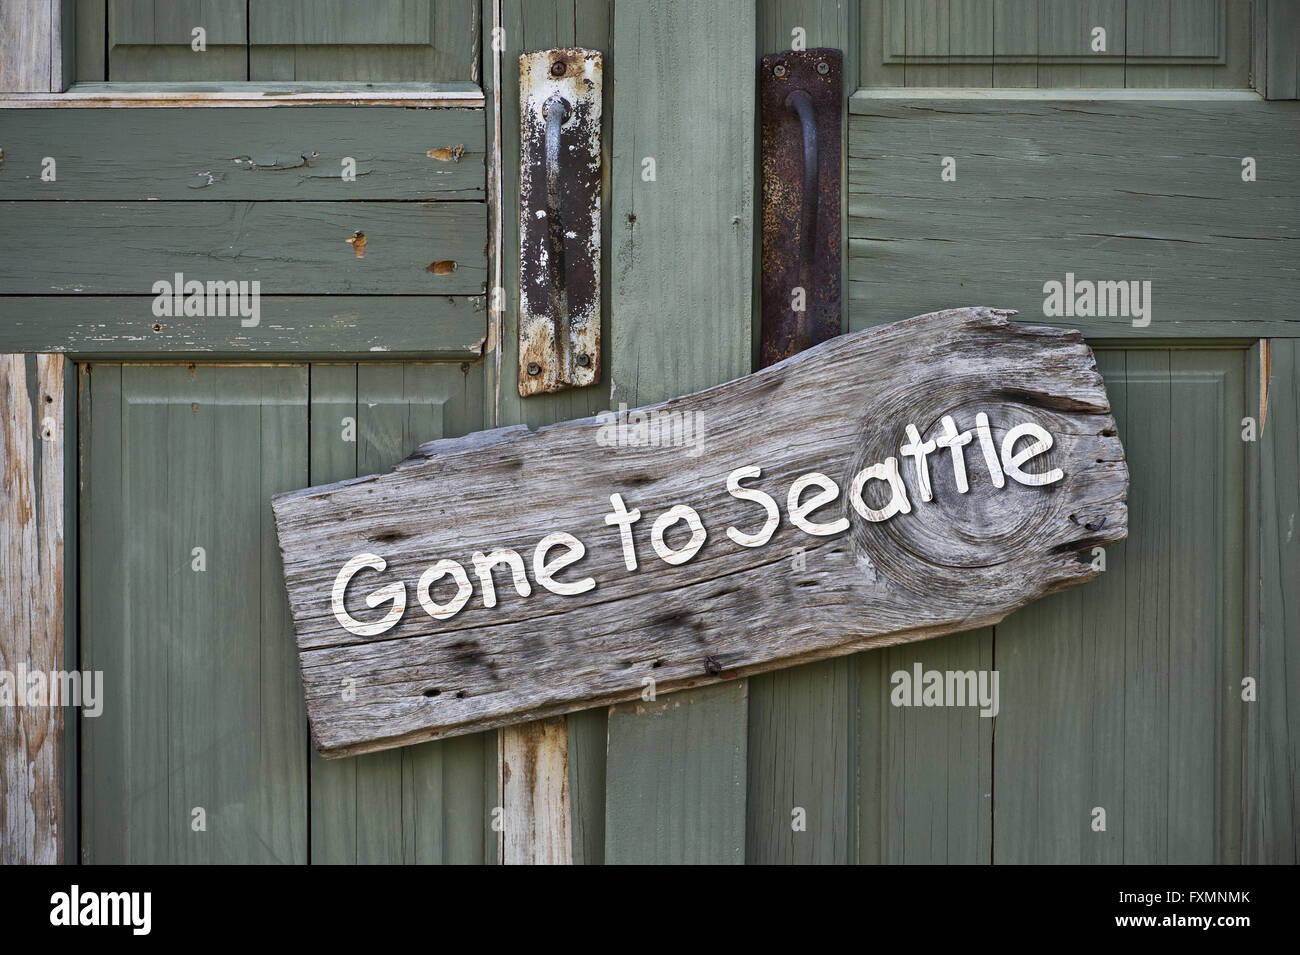 Gone to Seattle,USA sign on old green doors. Stock Photo